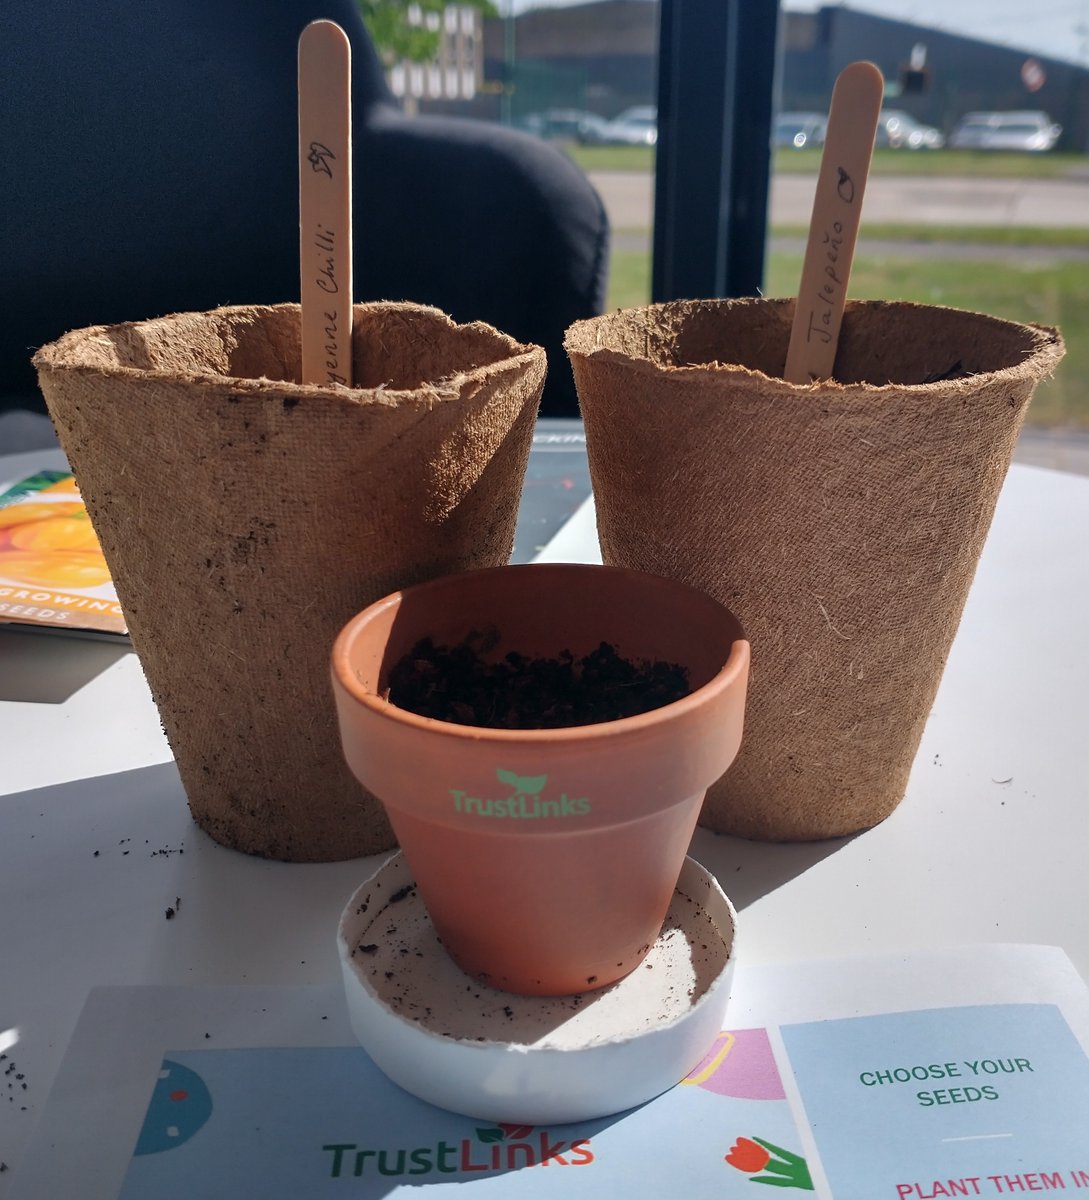 We've been busy growing Chilli plants to donate to our local charity @trustlinkscharity . Two weeks in and we're hoping to see some seedlings sprouting soon!🌱
Find out more about Trust Links here👇

trustlinks.org

#trustlinks #mentalhealth #transforminglives